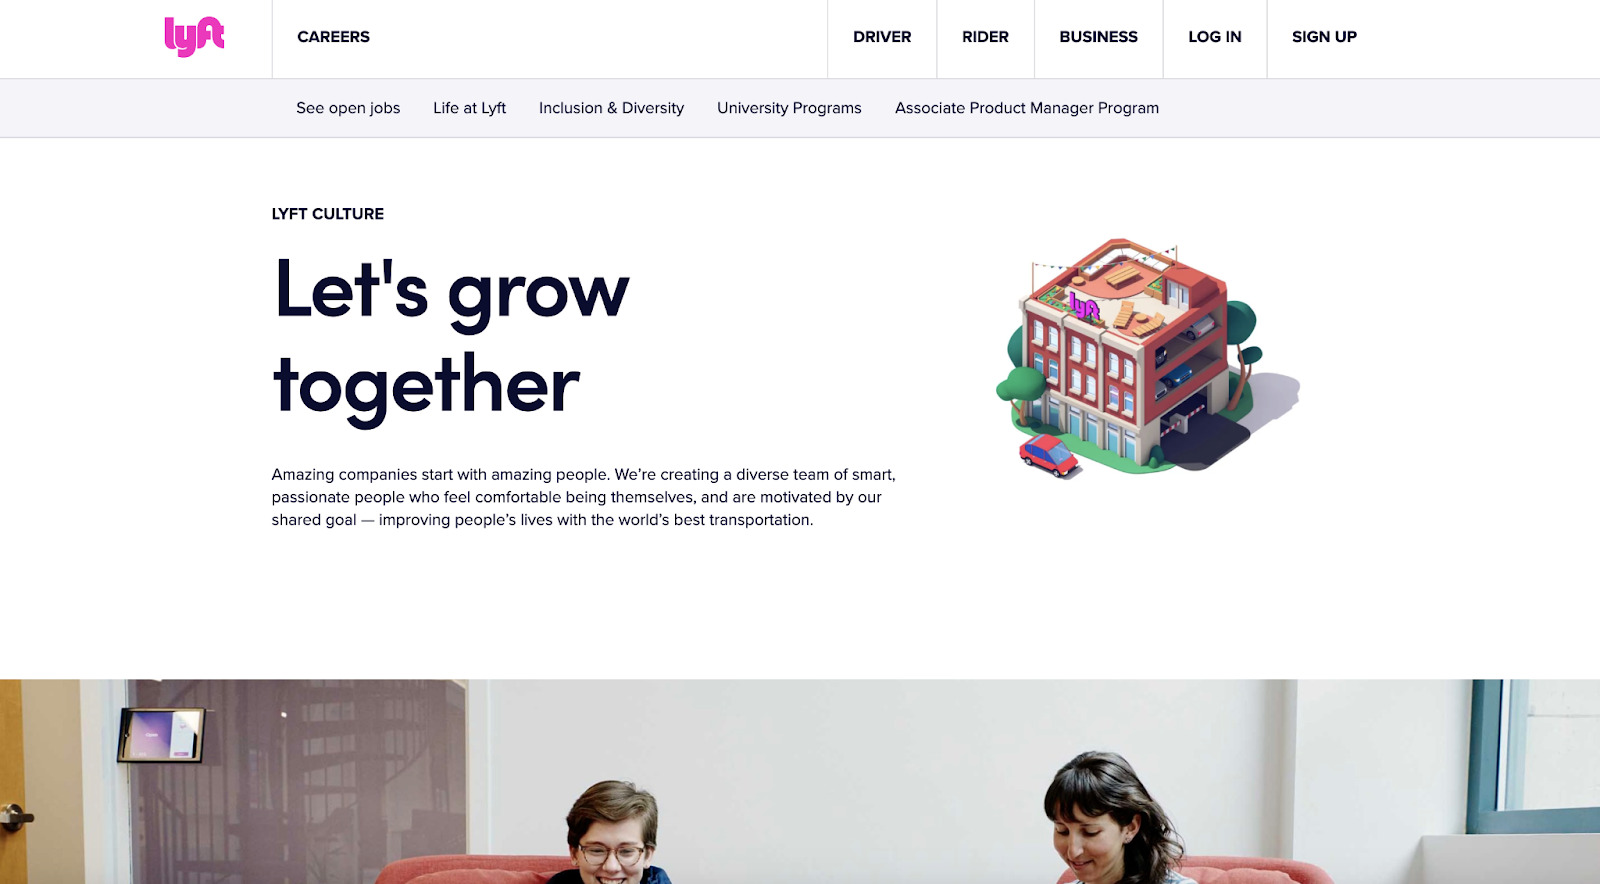 Lyft harnesses the values of teamwork and togetherness in its About Us page.